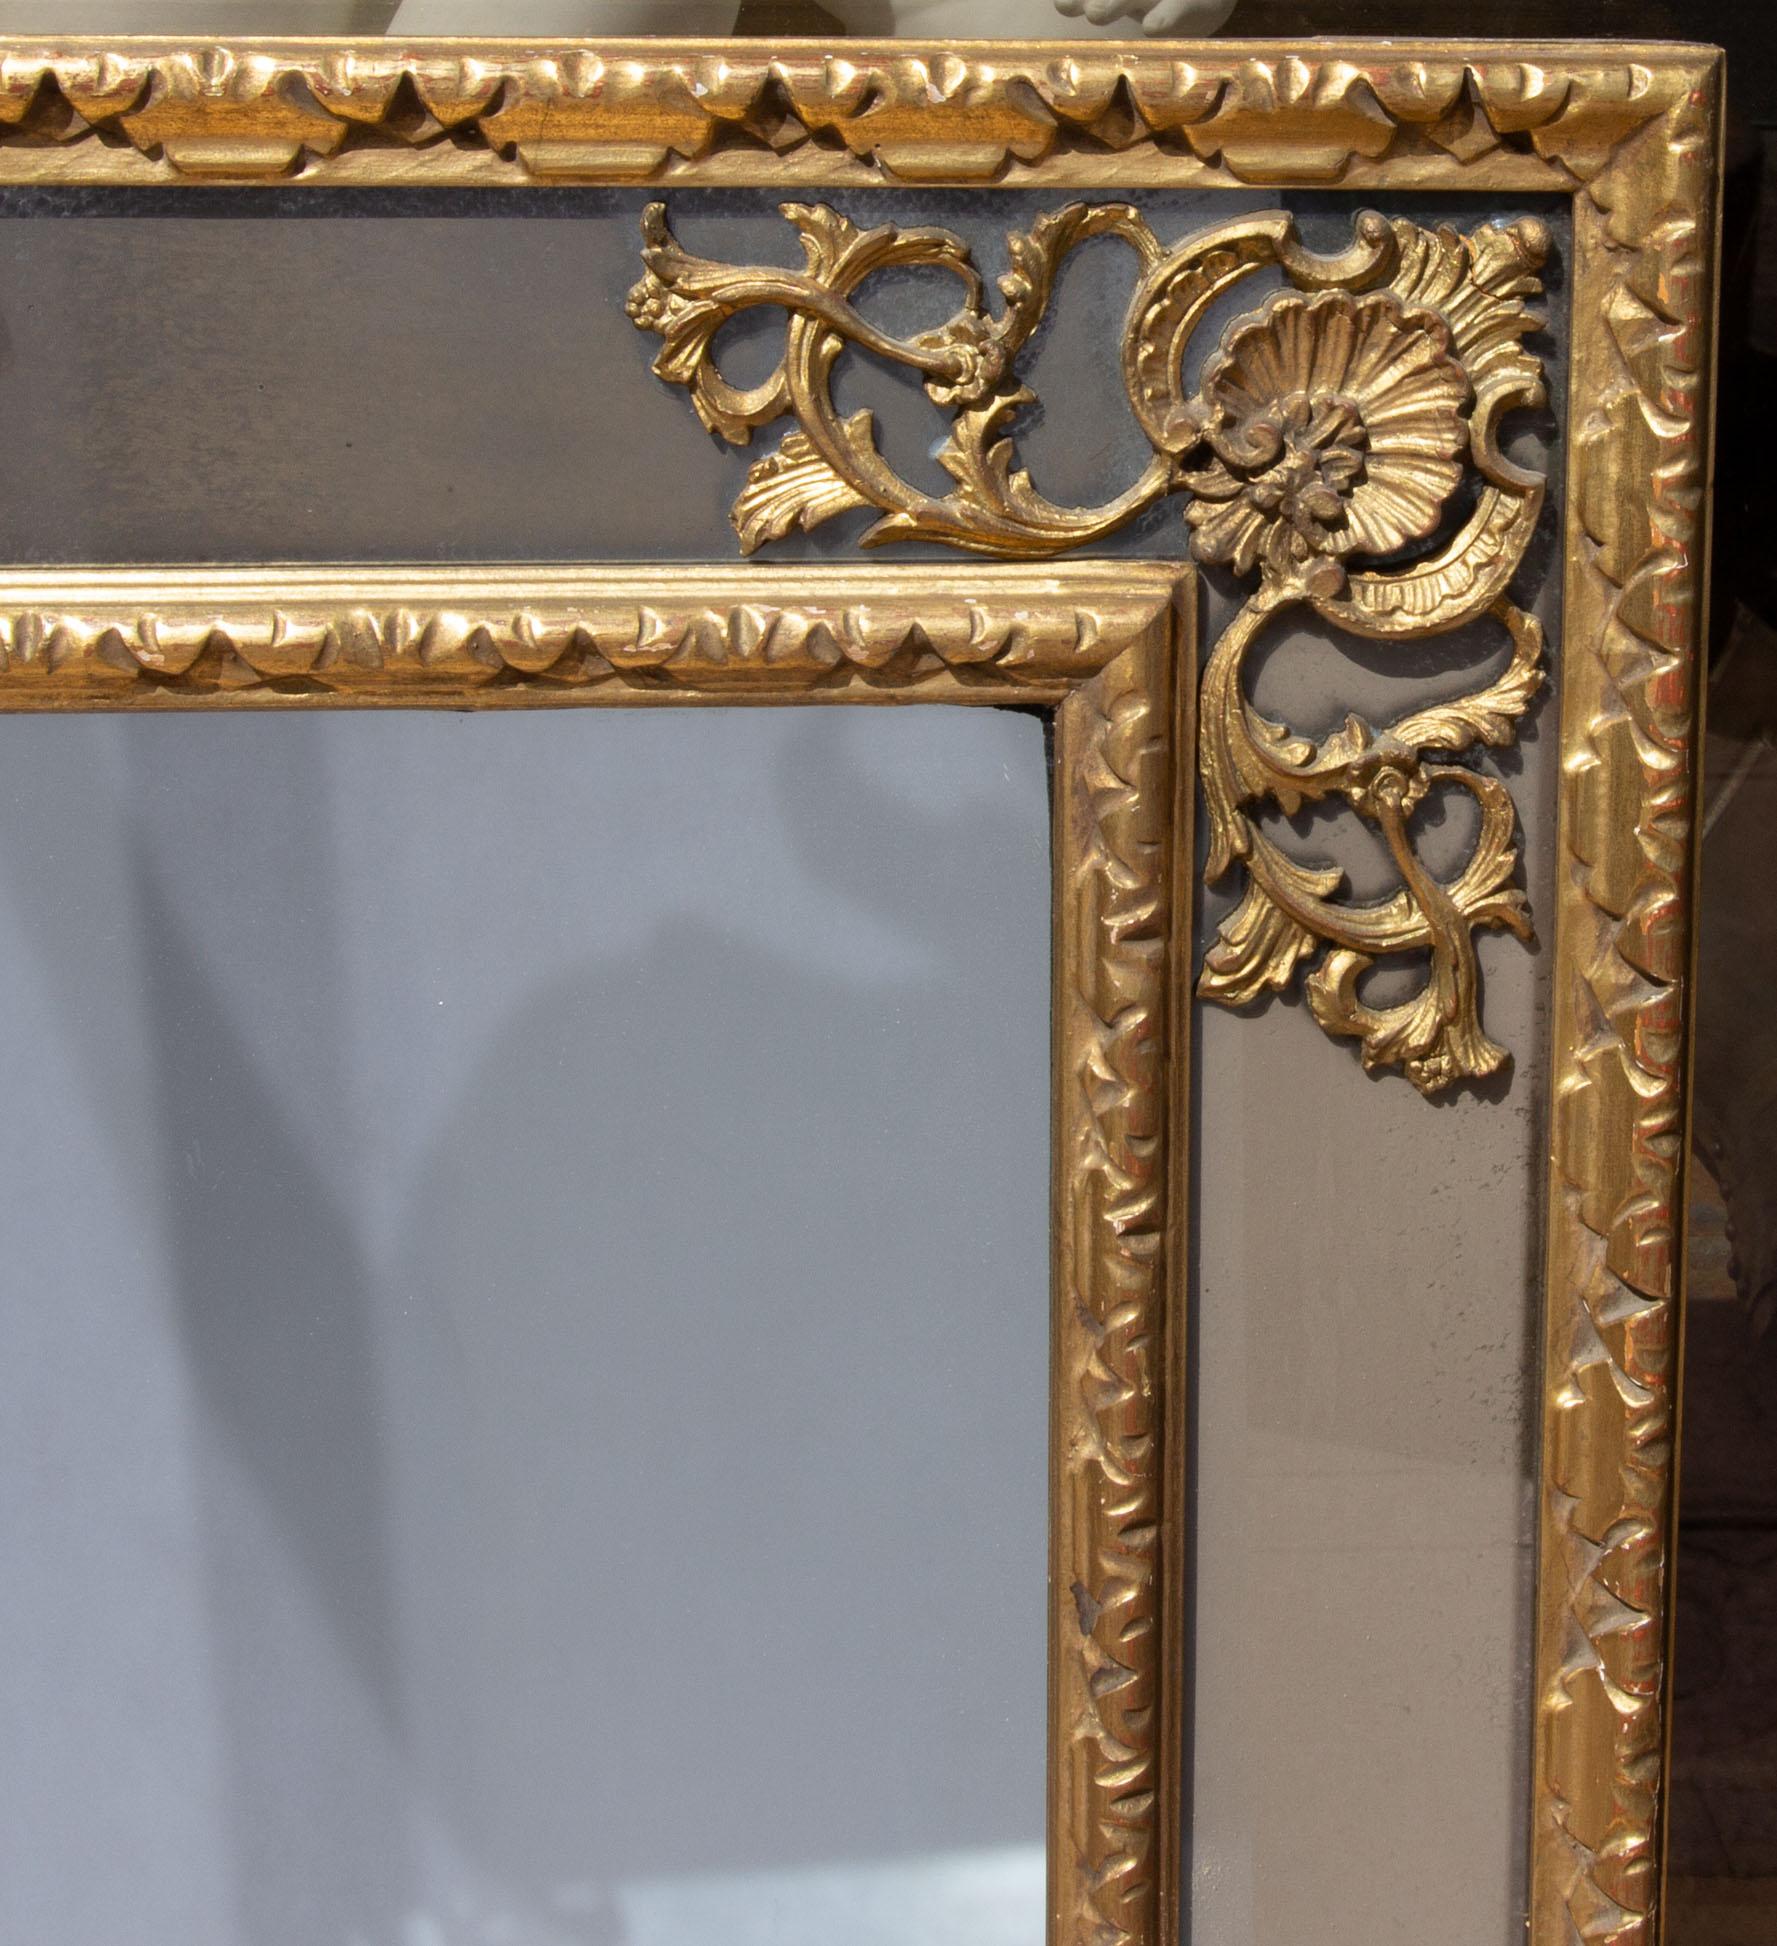 Carved and gilt paneled mirror. Side panels are smoked mirror. Midcentury. See our other mirrors. Please, contact us for shipping options.
Presented by Joseph Dasta Antiques